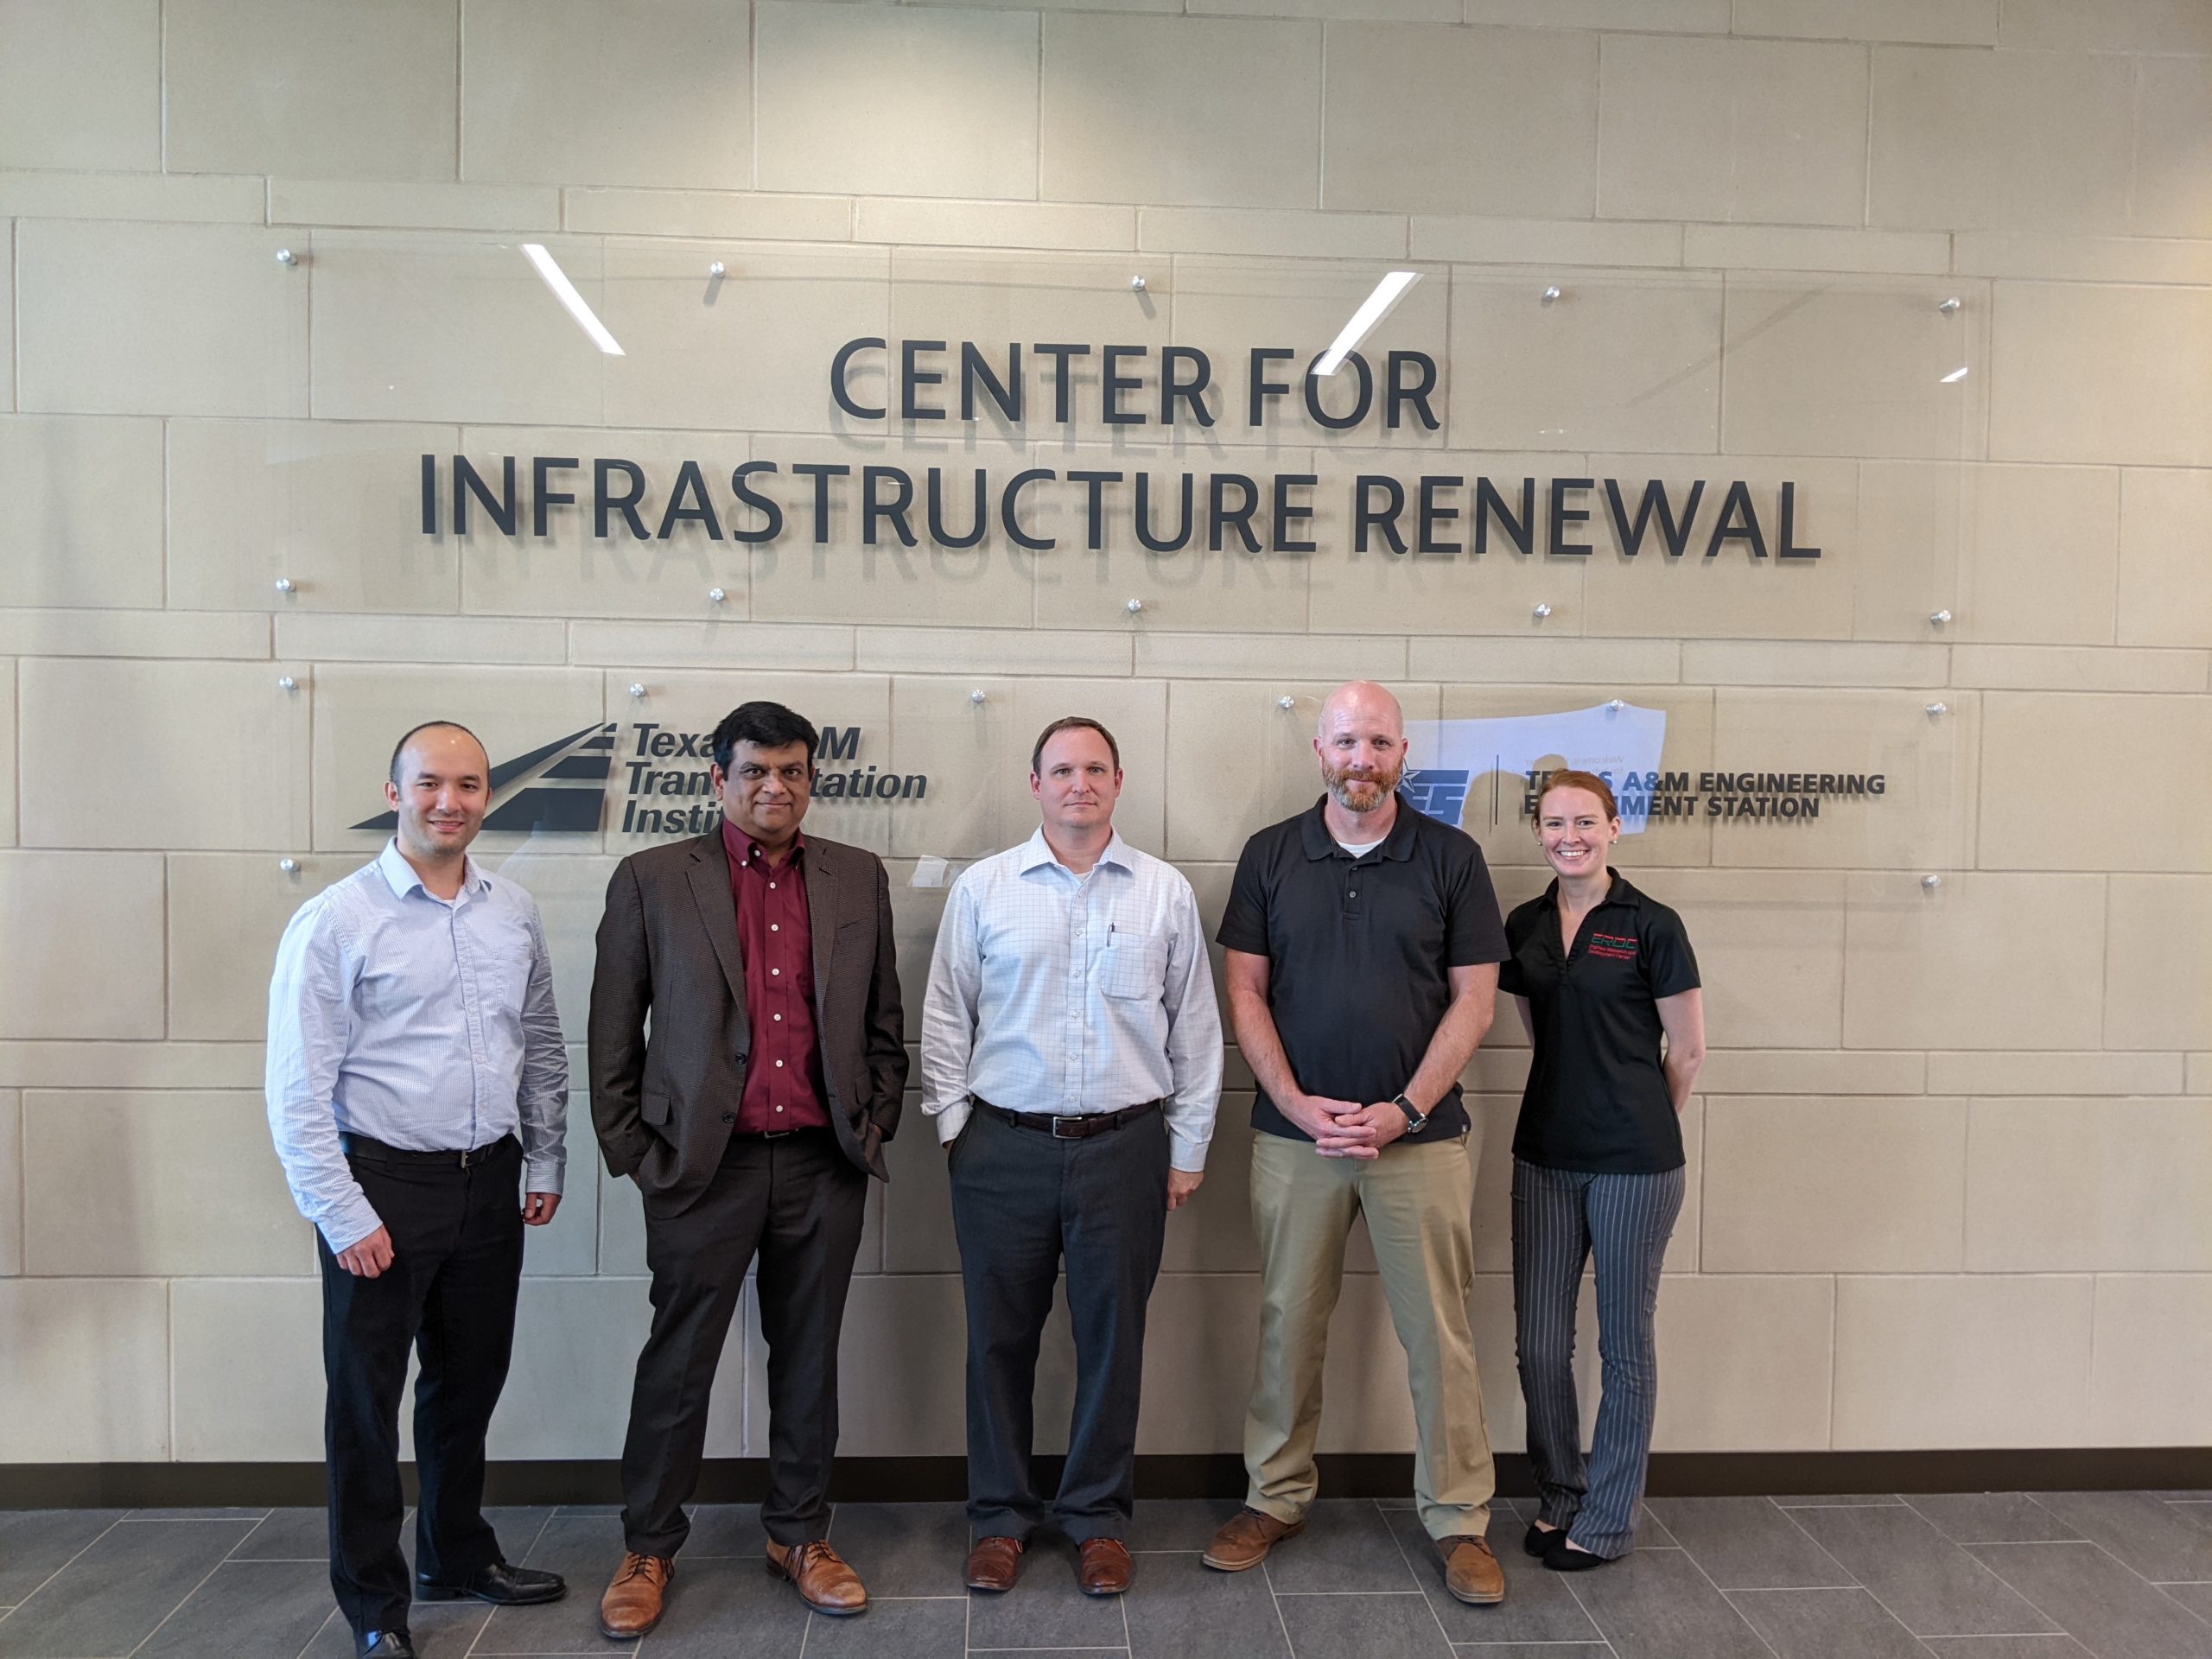 Center for Infrastructure Renewal